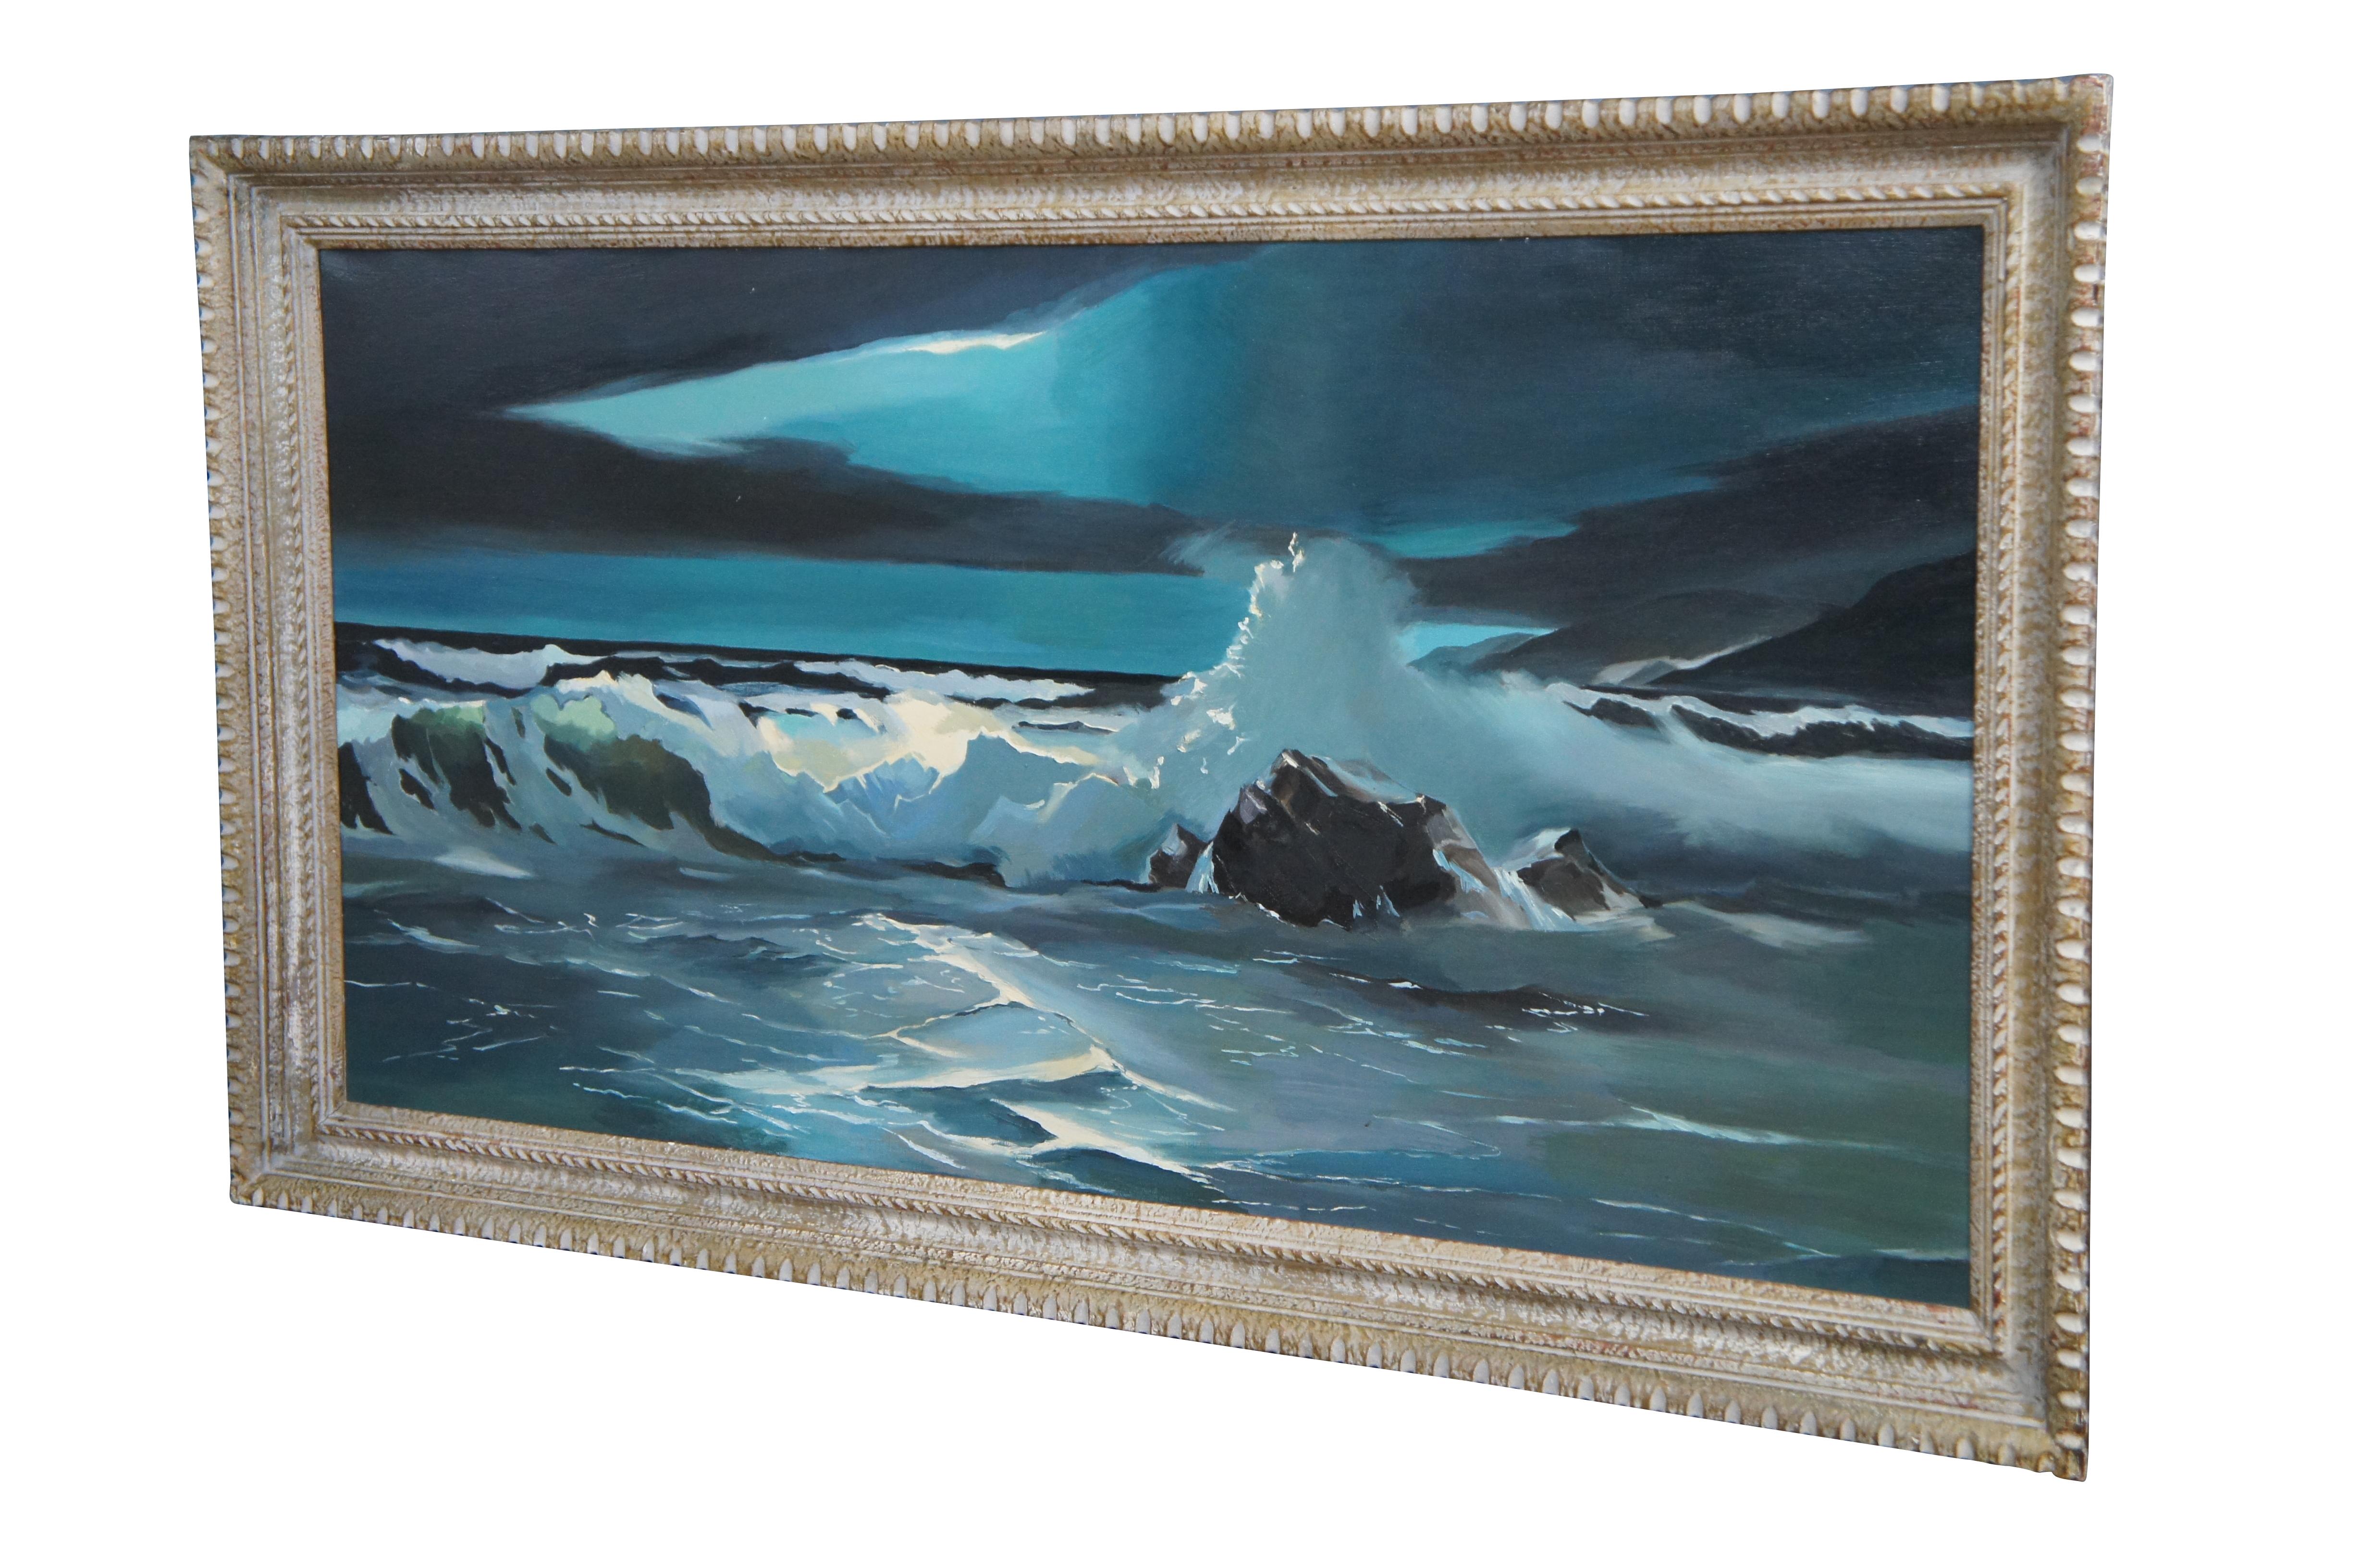 Mid to late 20th century expressionist nautical oil painting on canvas featuring a seascape with ocean waves crashing on rocks under a night sky. Fukazen & Co. Est 1728 Kawagoe City, Saitama, Japan.

Provenance:
Estate of J. Frederic Gagel, owner